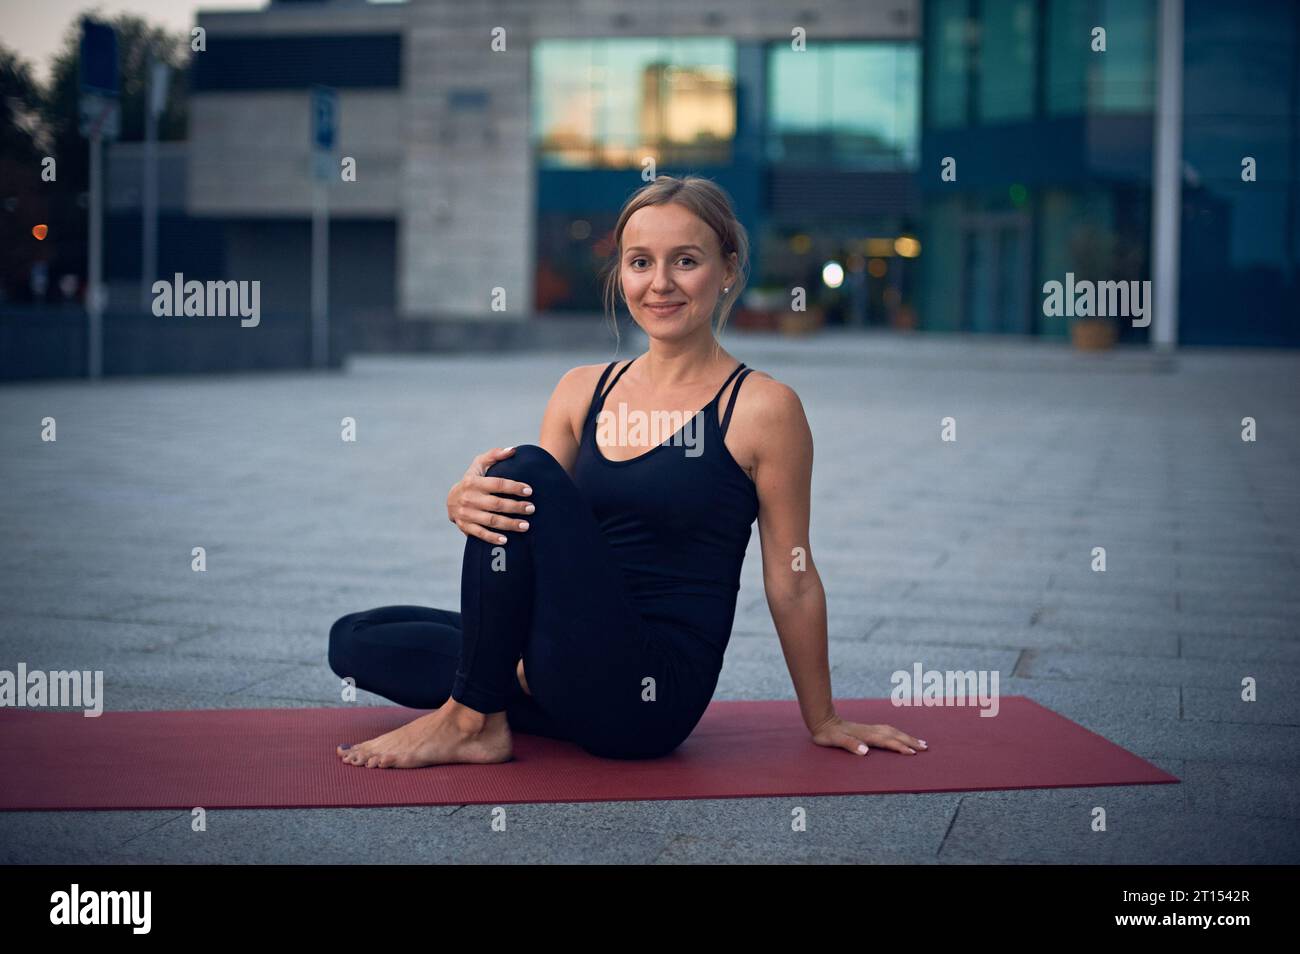 Beautiful young woman prepares to practice yoga asana Marichiasana 4 - sage pose outdoors against the background of a modern city. Stock Photo